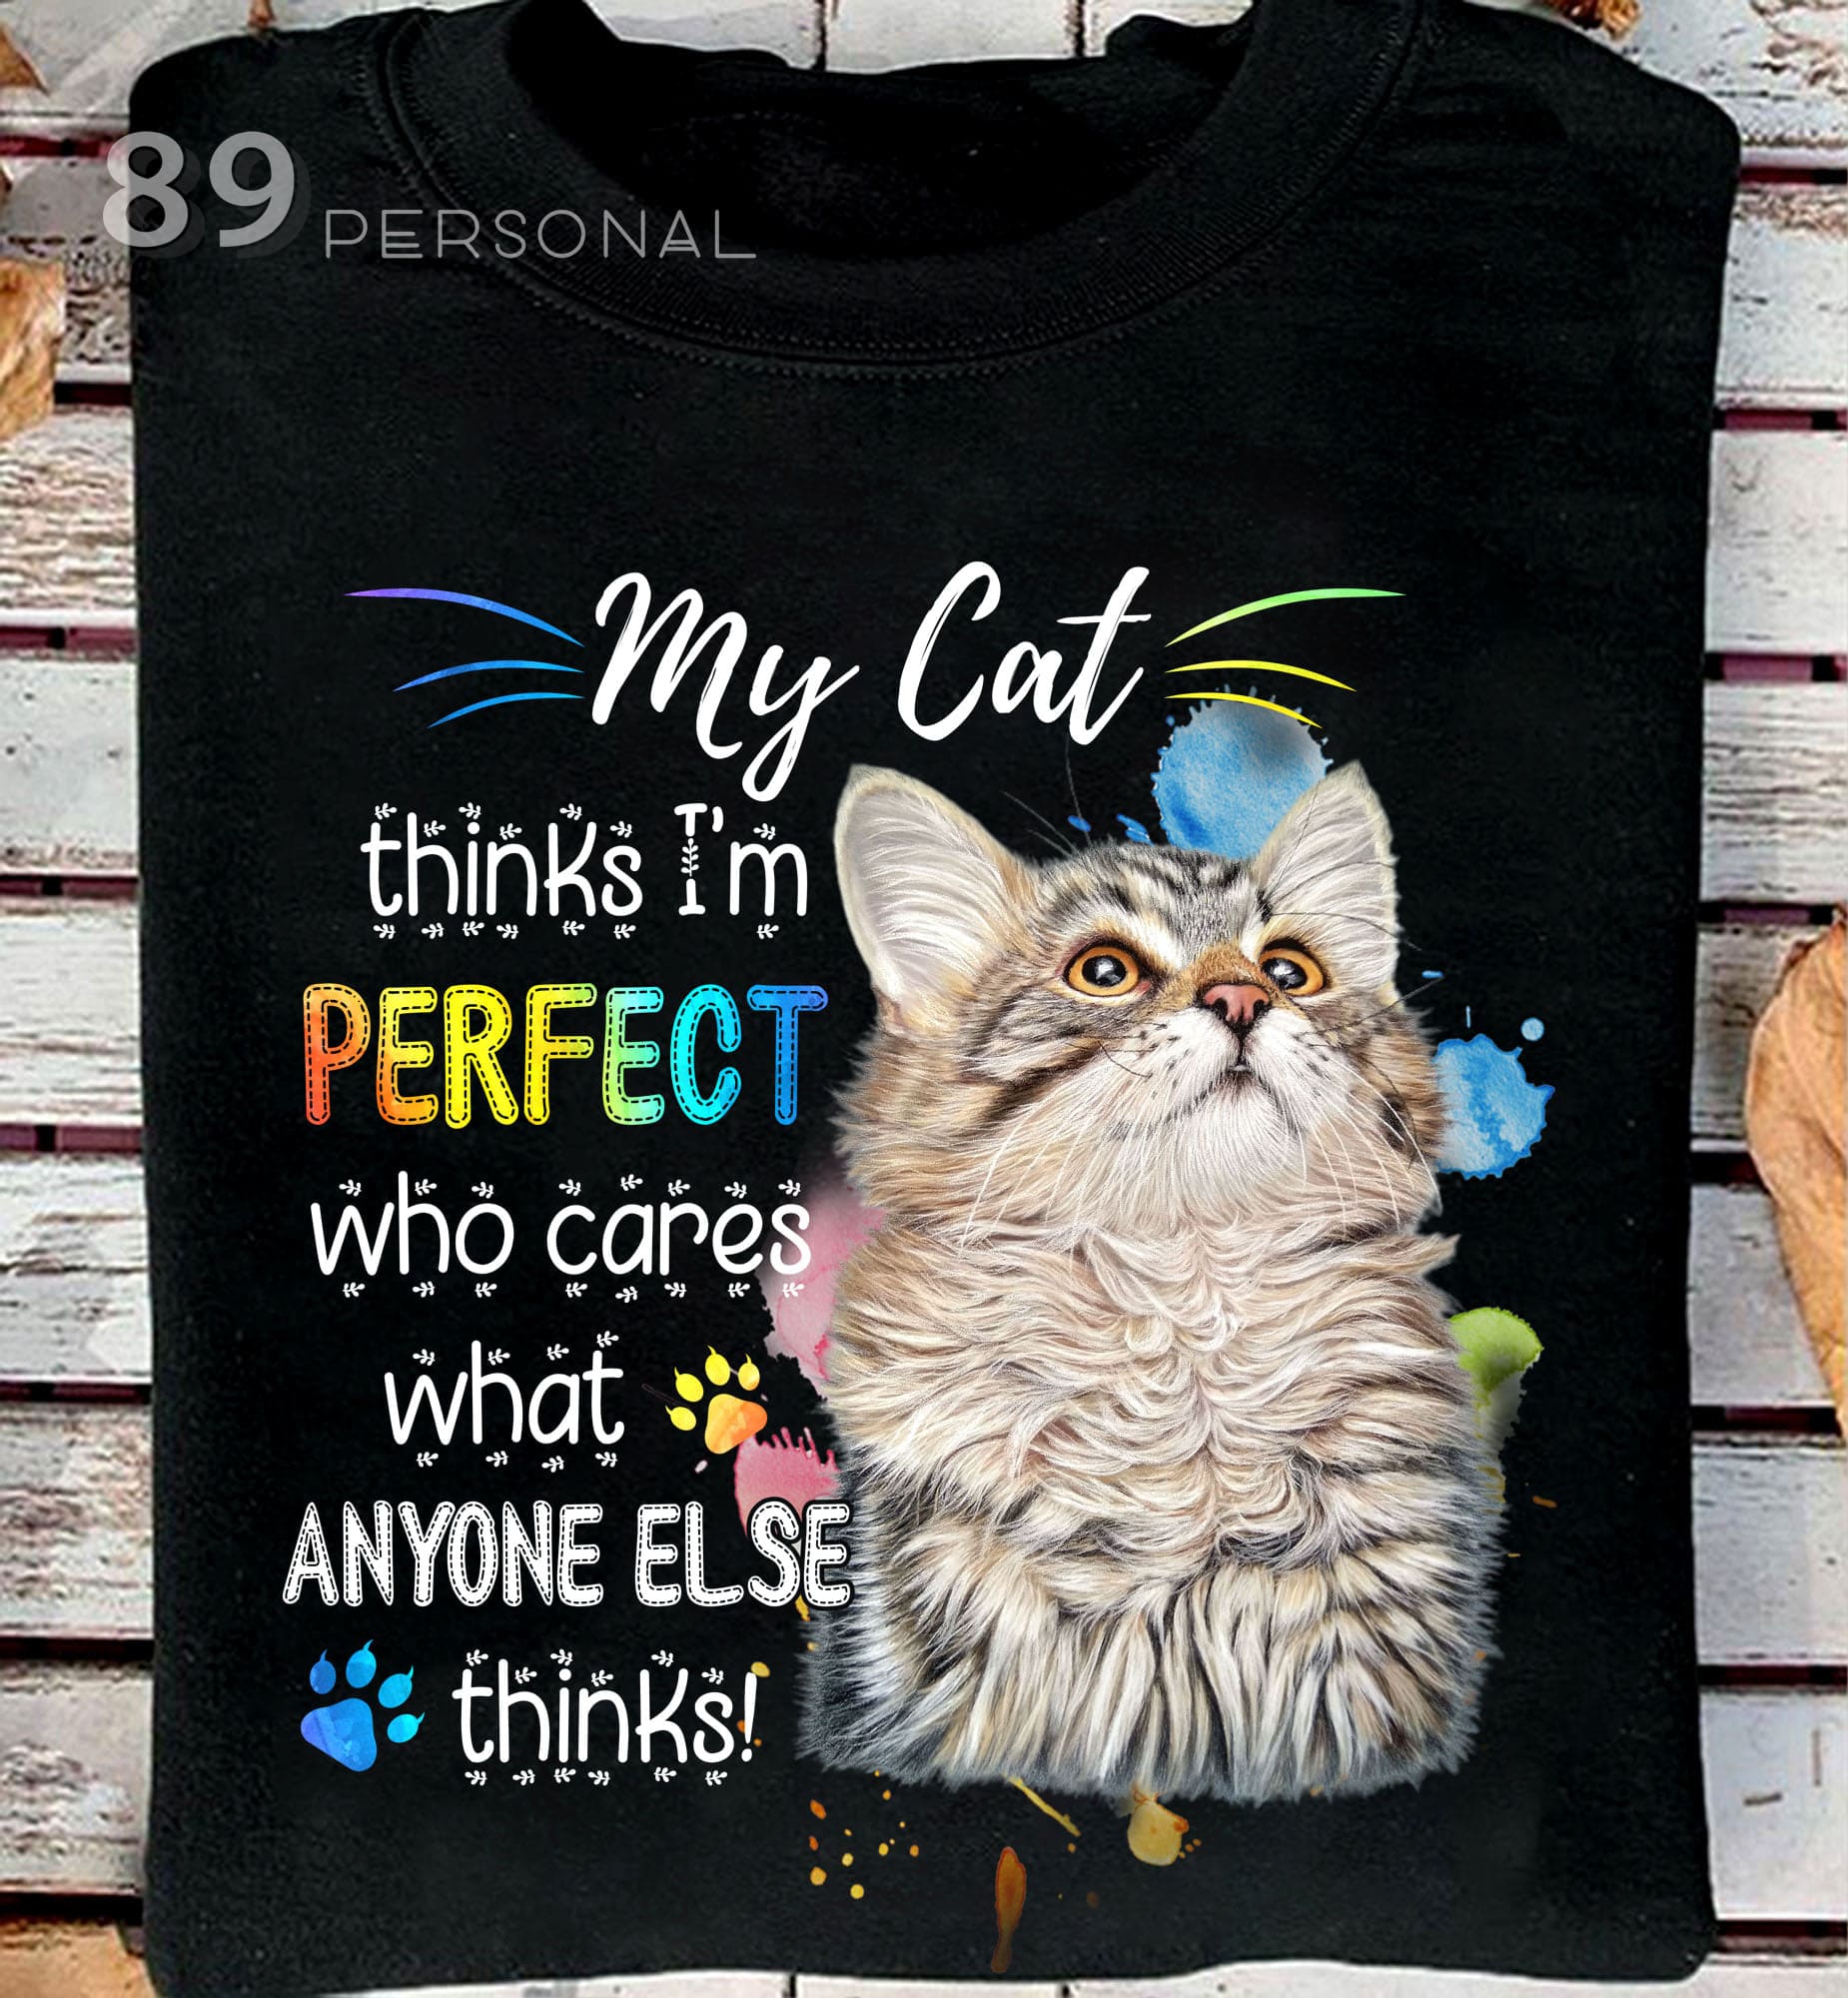 My cat think i'm perfect who cares what anyone else thinks - Cat Graphic T-shirt